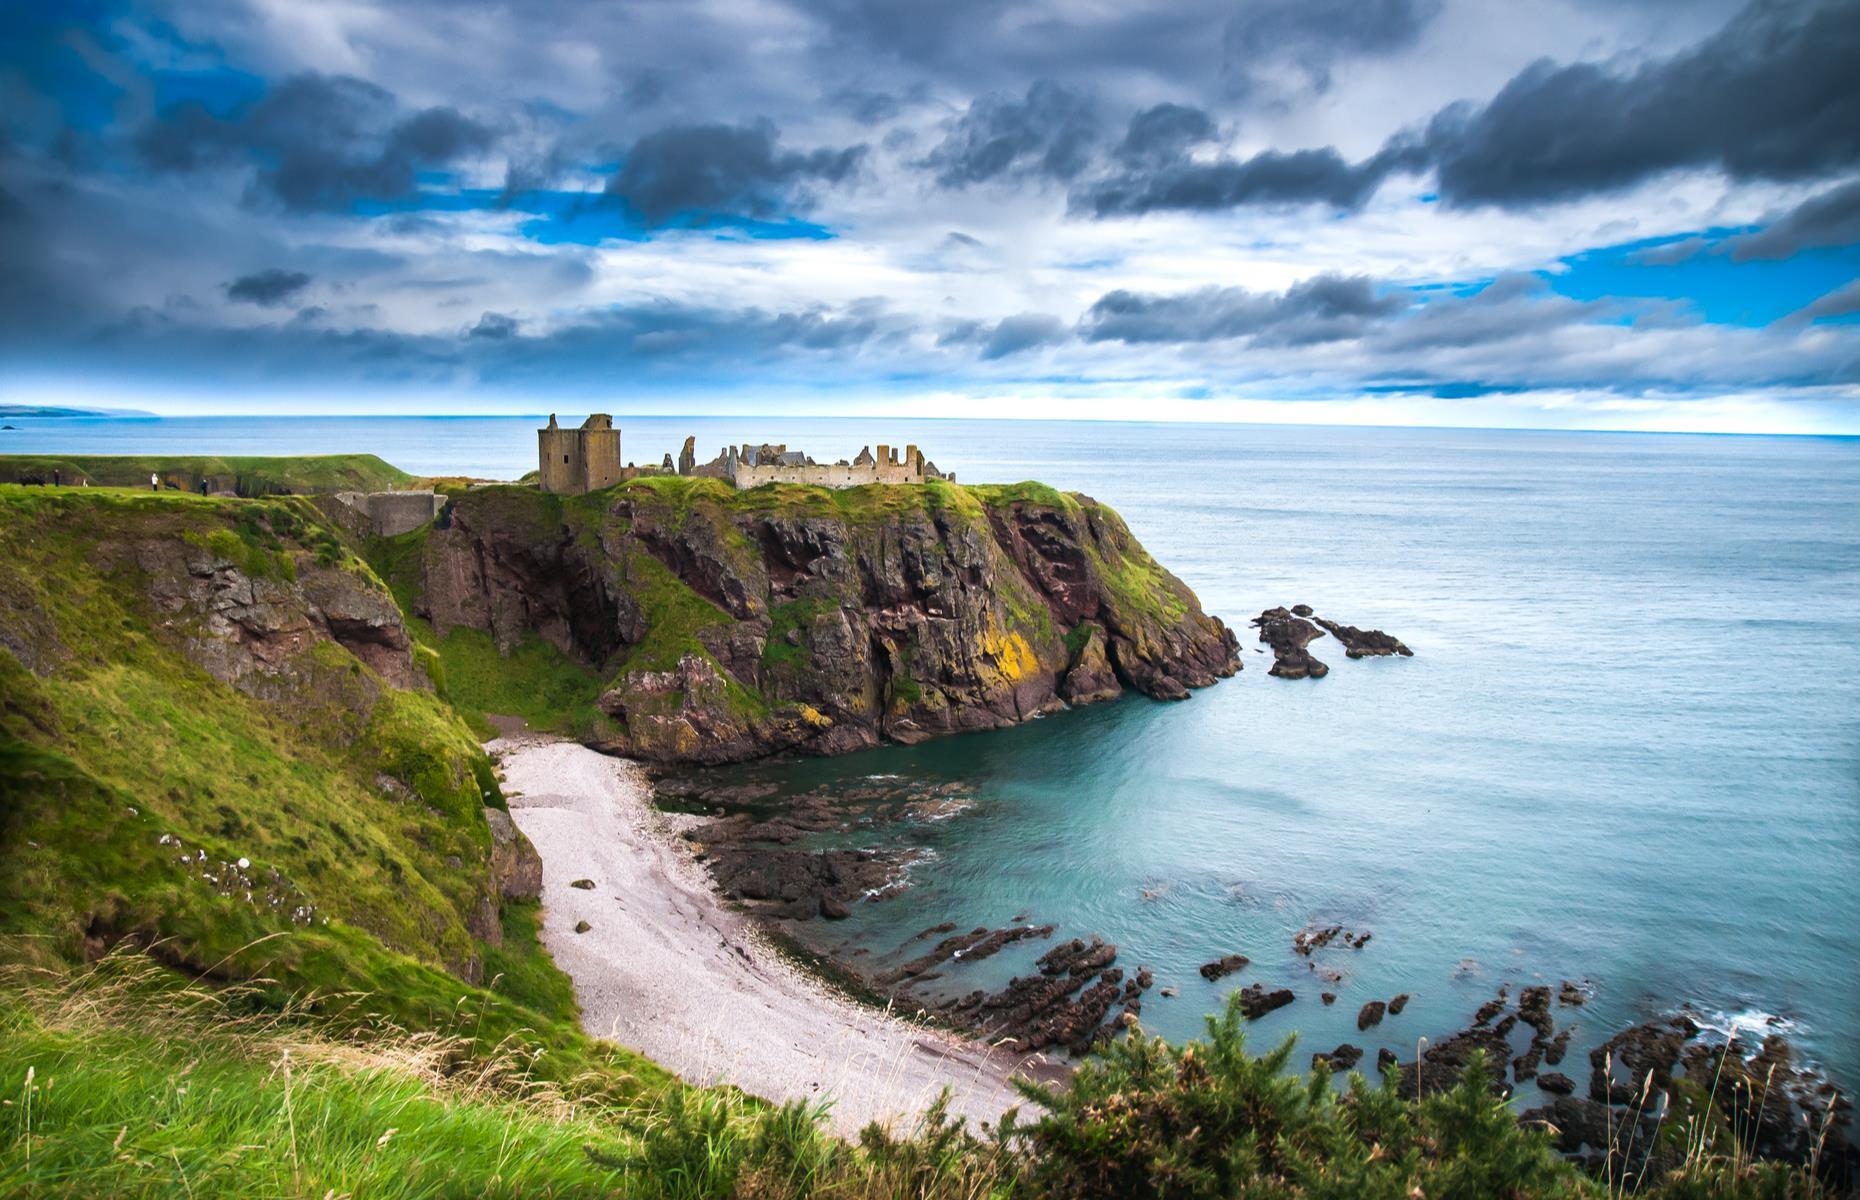 <p>Another brooding castle that's apparently ripe with spirits is <a href="https://www.dunnottarcastle.co.uk/">Dunnottar,</a> which perches on mist-hung cliffs above the North Sea in Scotland's northeast. The Scottish and English have battled fiercely for this stronghold over the centuries, and now it stands as an arresting ruin with eerie dungeons and passageways to boot. Some fascinating ghost stories abound too. The ghost of a young girl in tartan is said to haunt the old brewery, while a spectral soldier has apparently been seen looking out to sea.</p>